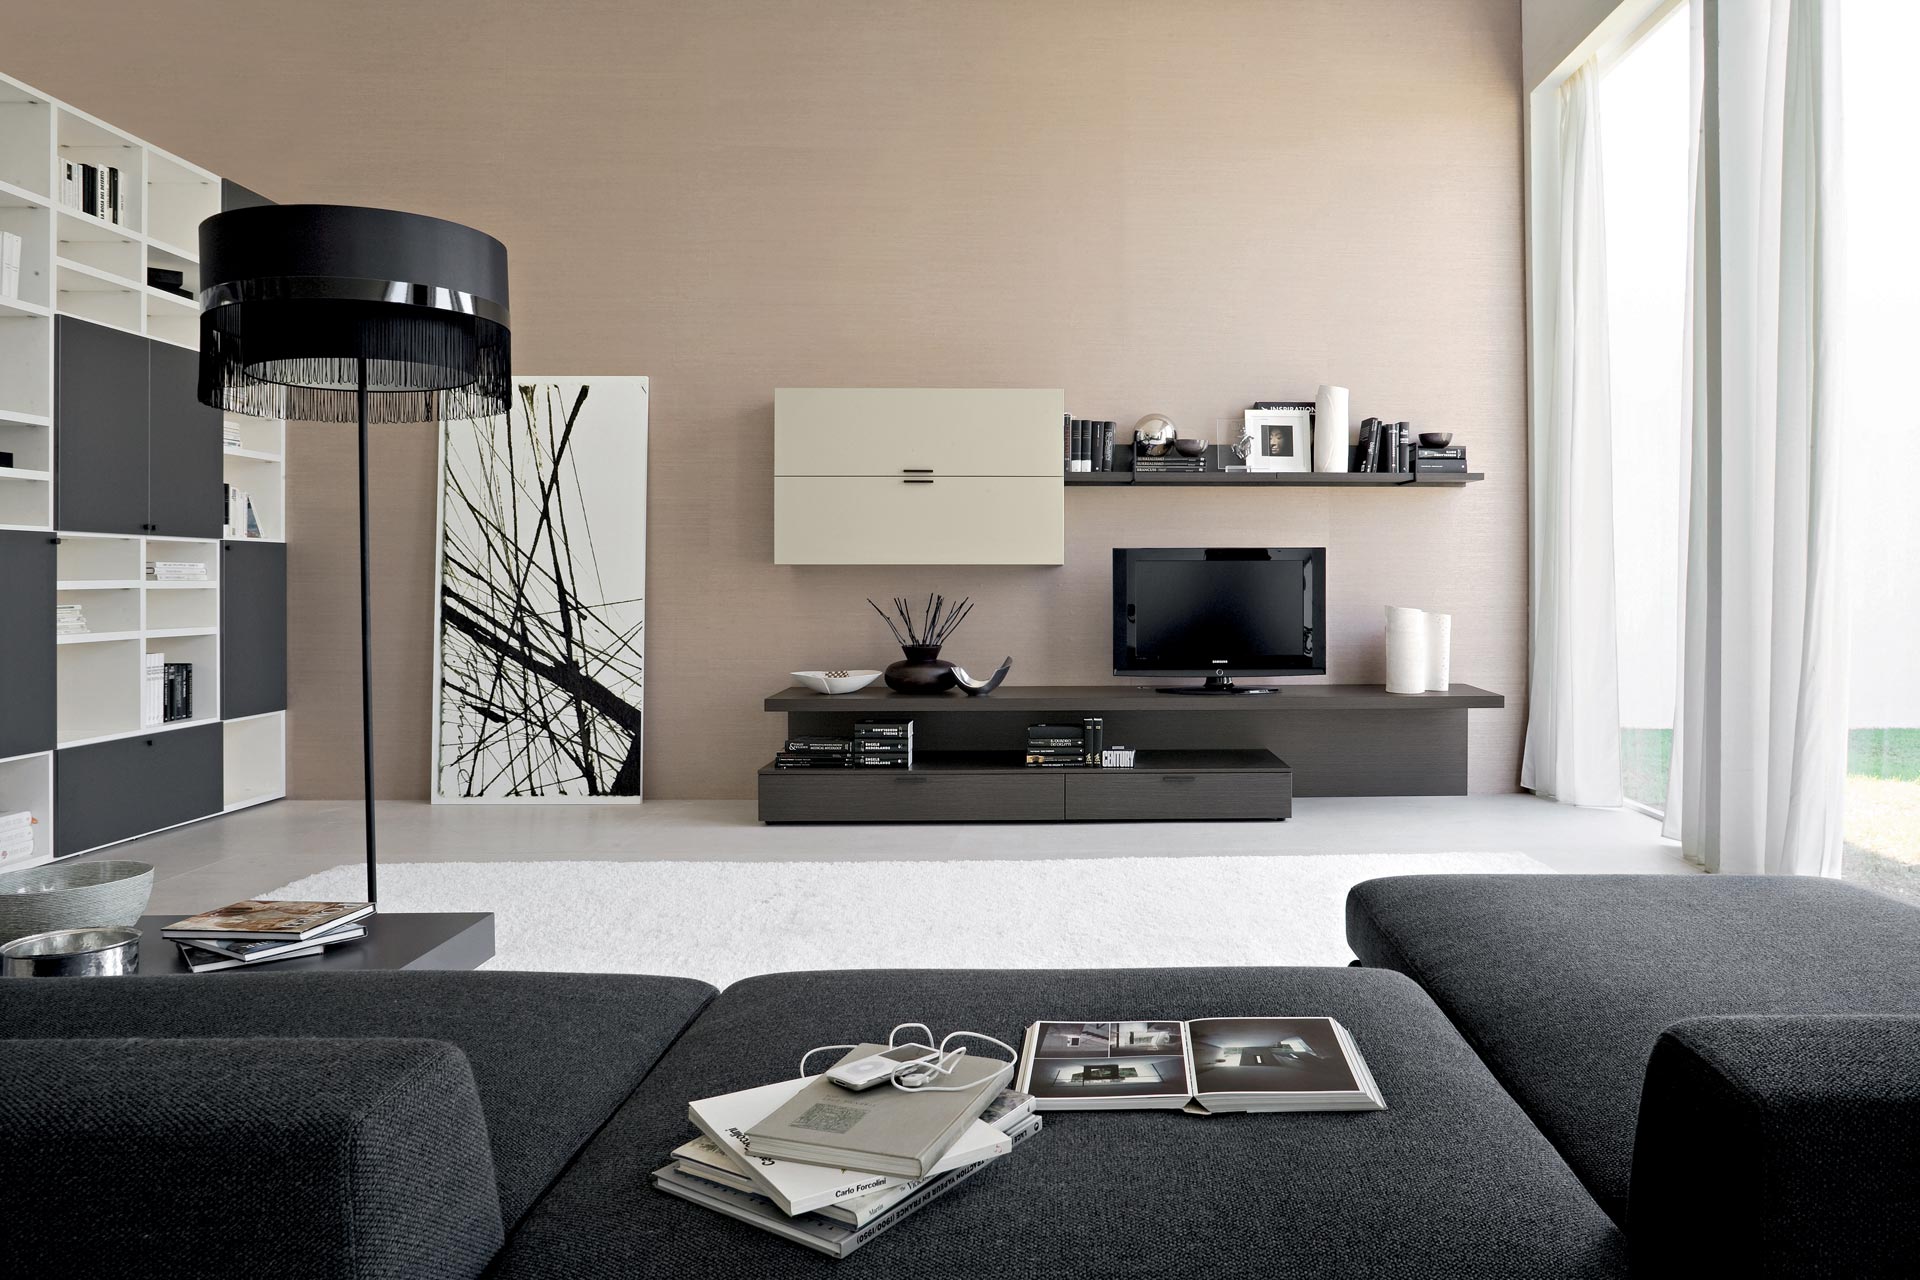 Black Furniture Sofa And Lamp With Black And White Storage For Modern Living Room Design Ideas Interior Design